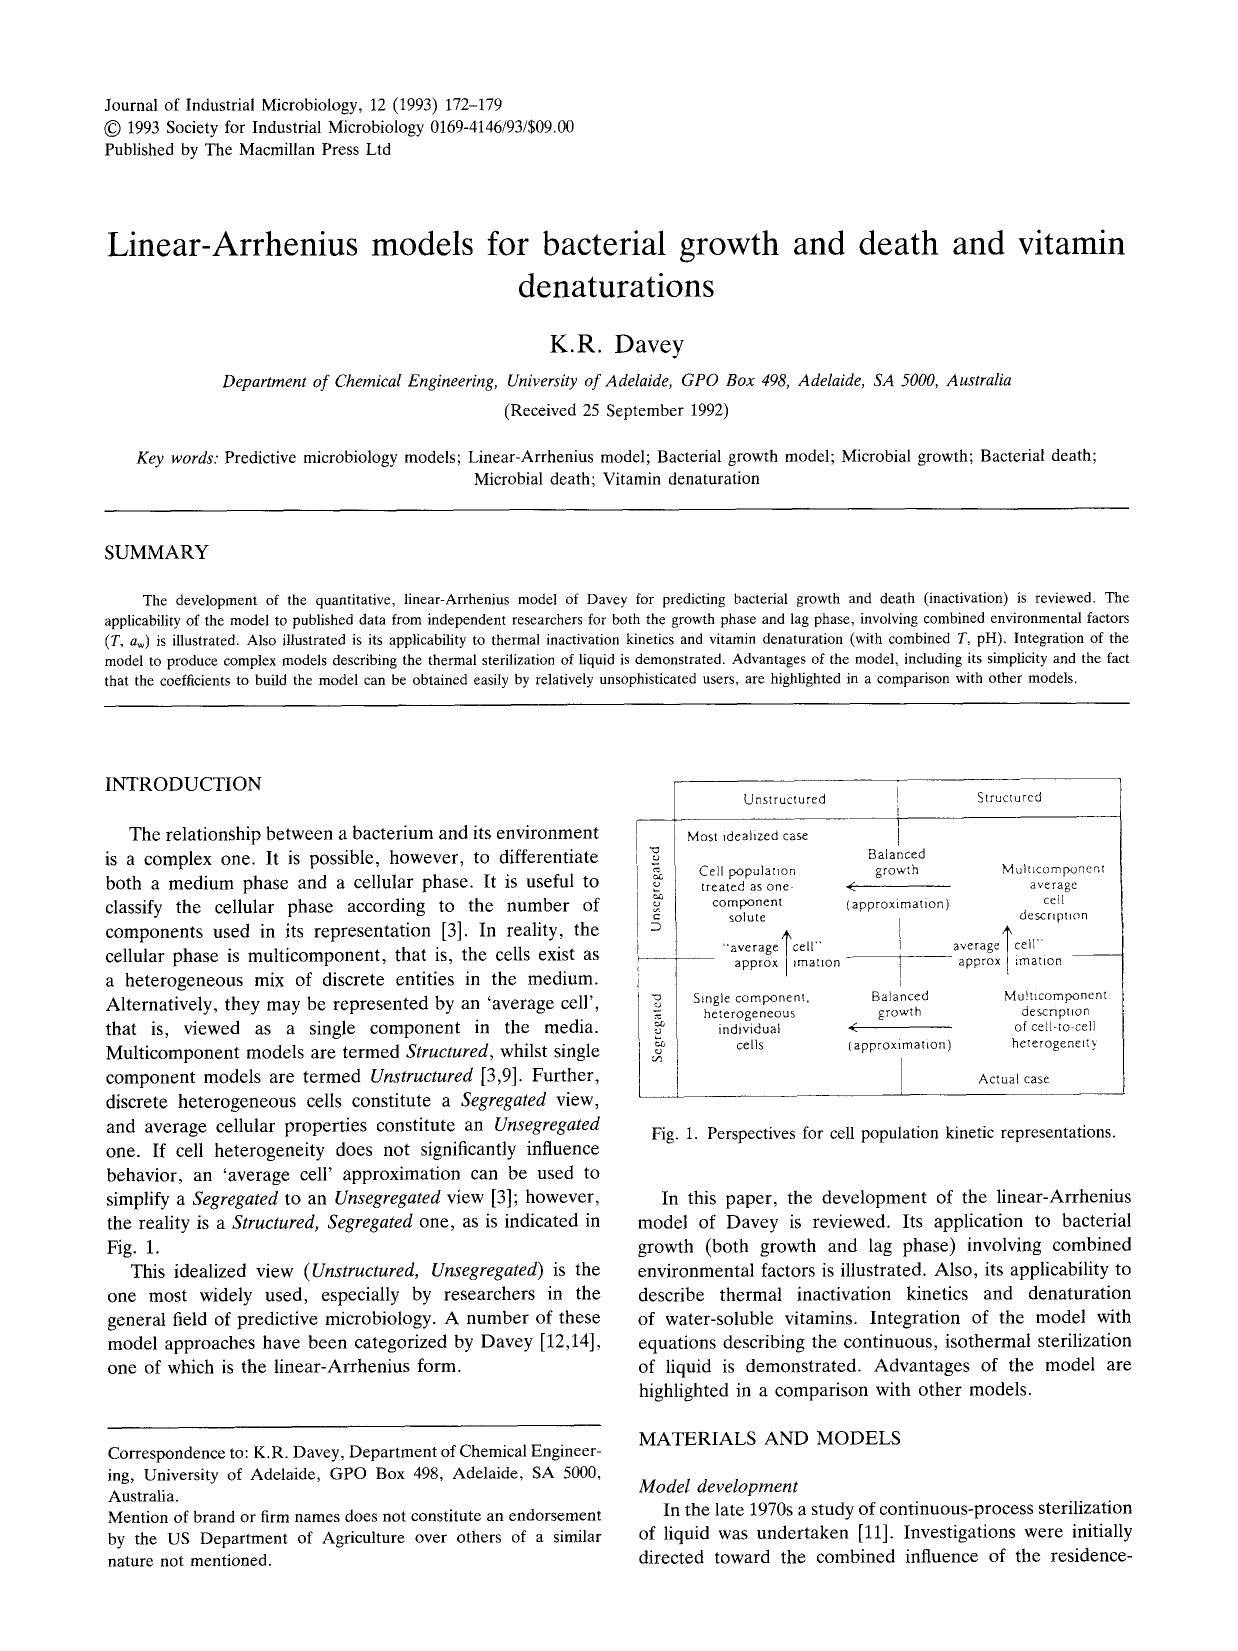 Linear-Arrhenius models for bacterial growth and death and vitamin denaturations by Unknown